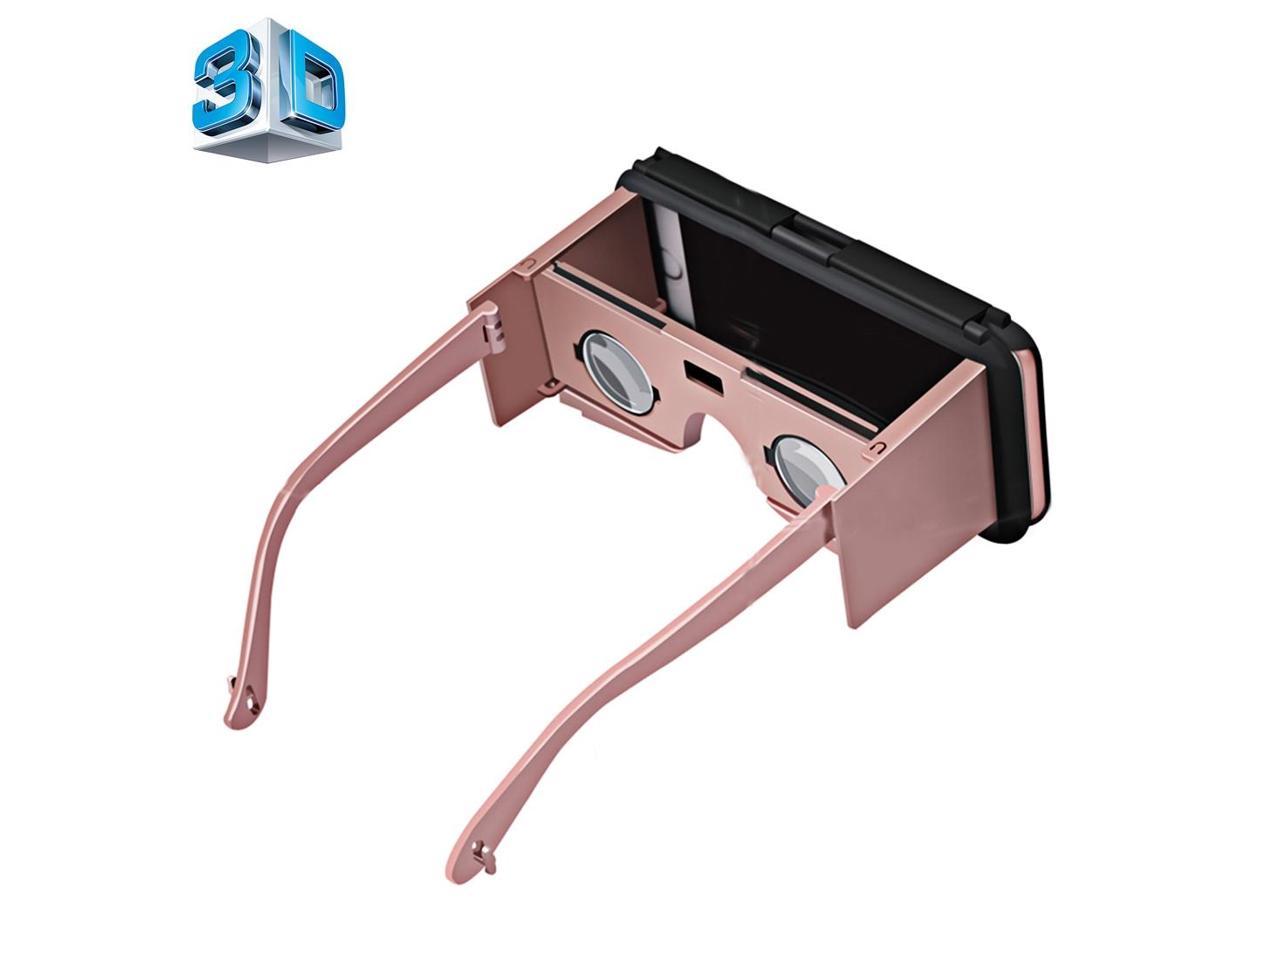 VR CASE 2 Virtual Reality 3D Video Glasses with Protective Case Function for iPhone 6 & 6s(Gold)